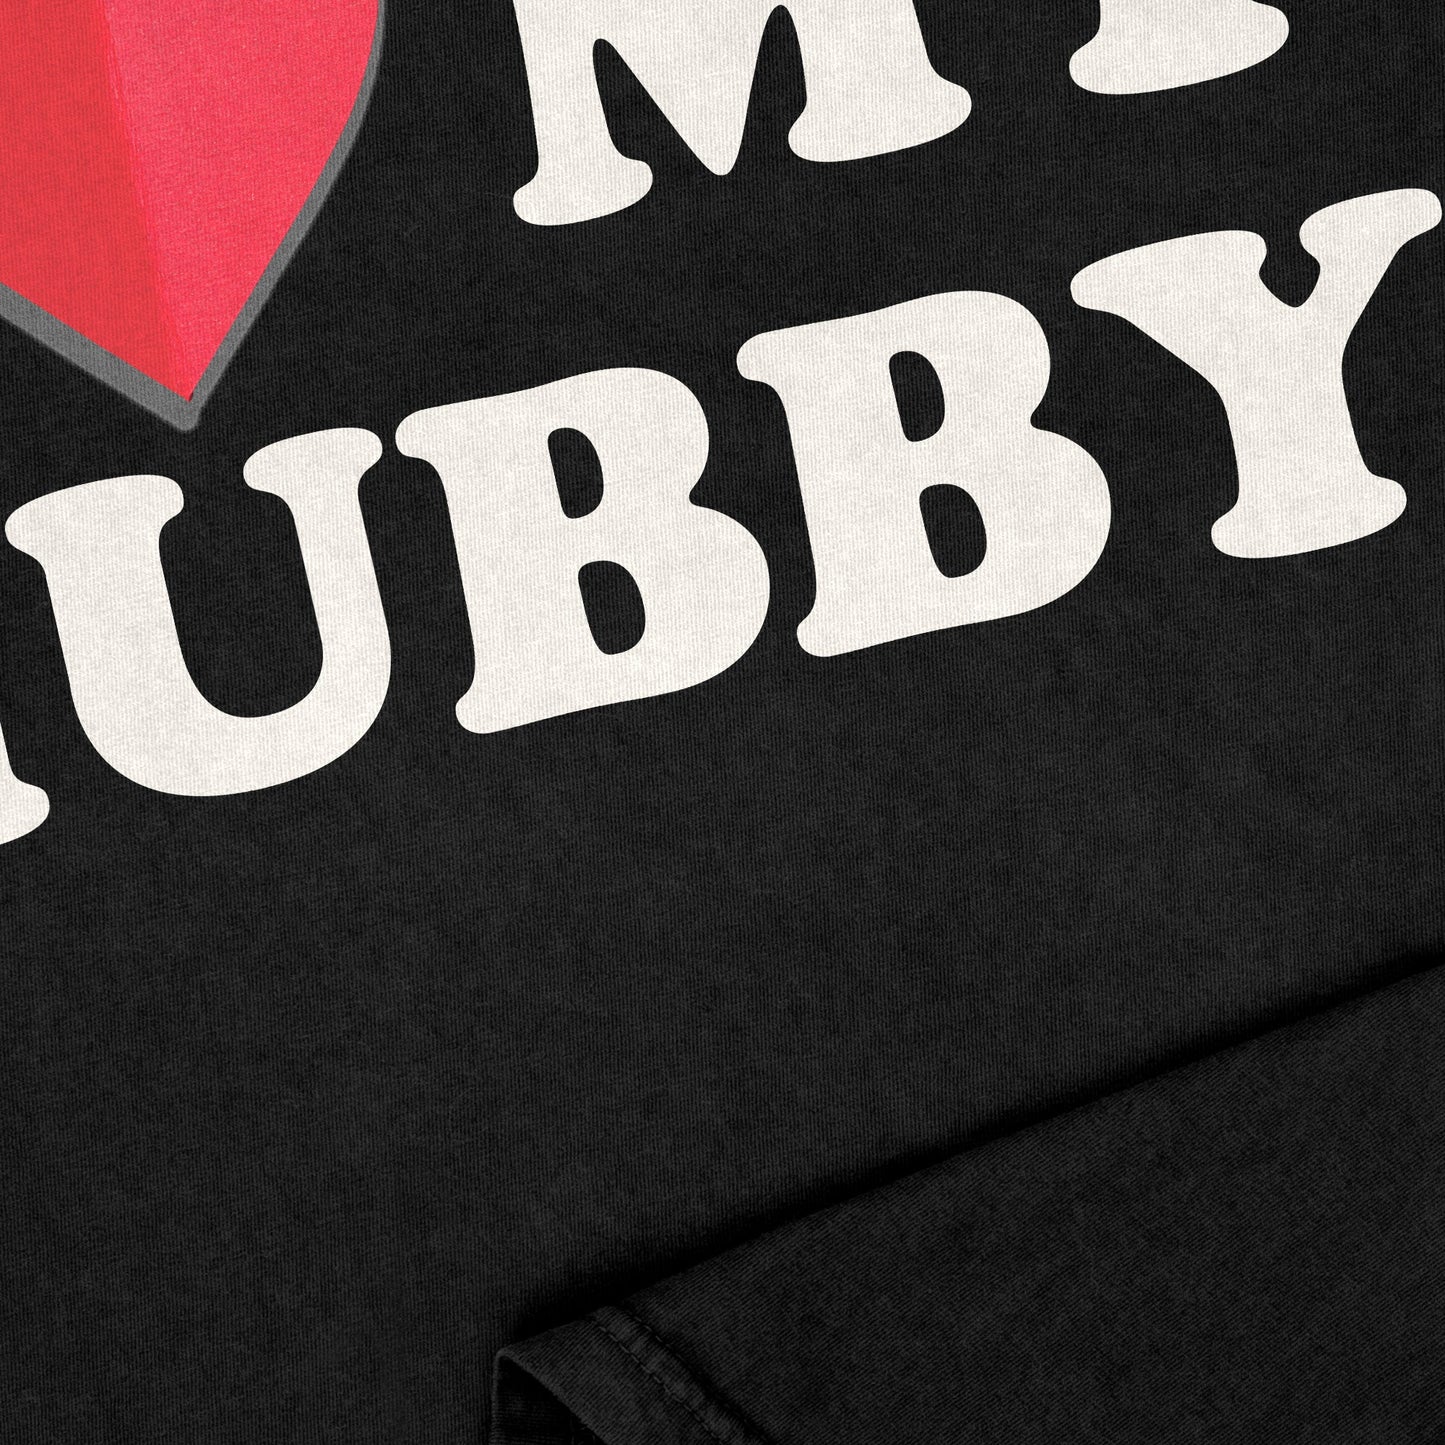 I Heart My Hubby Garment-Dyed Tee - Stories You Can Wear